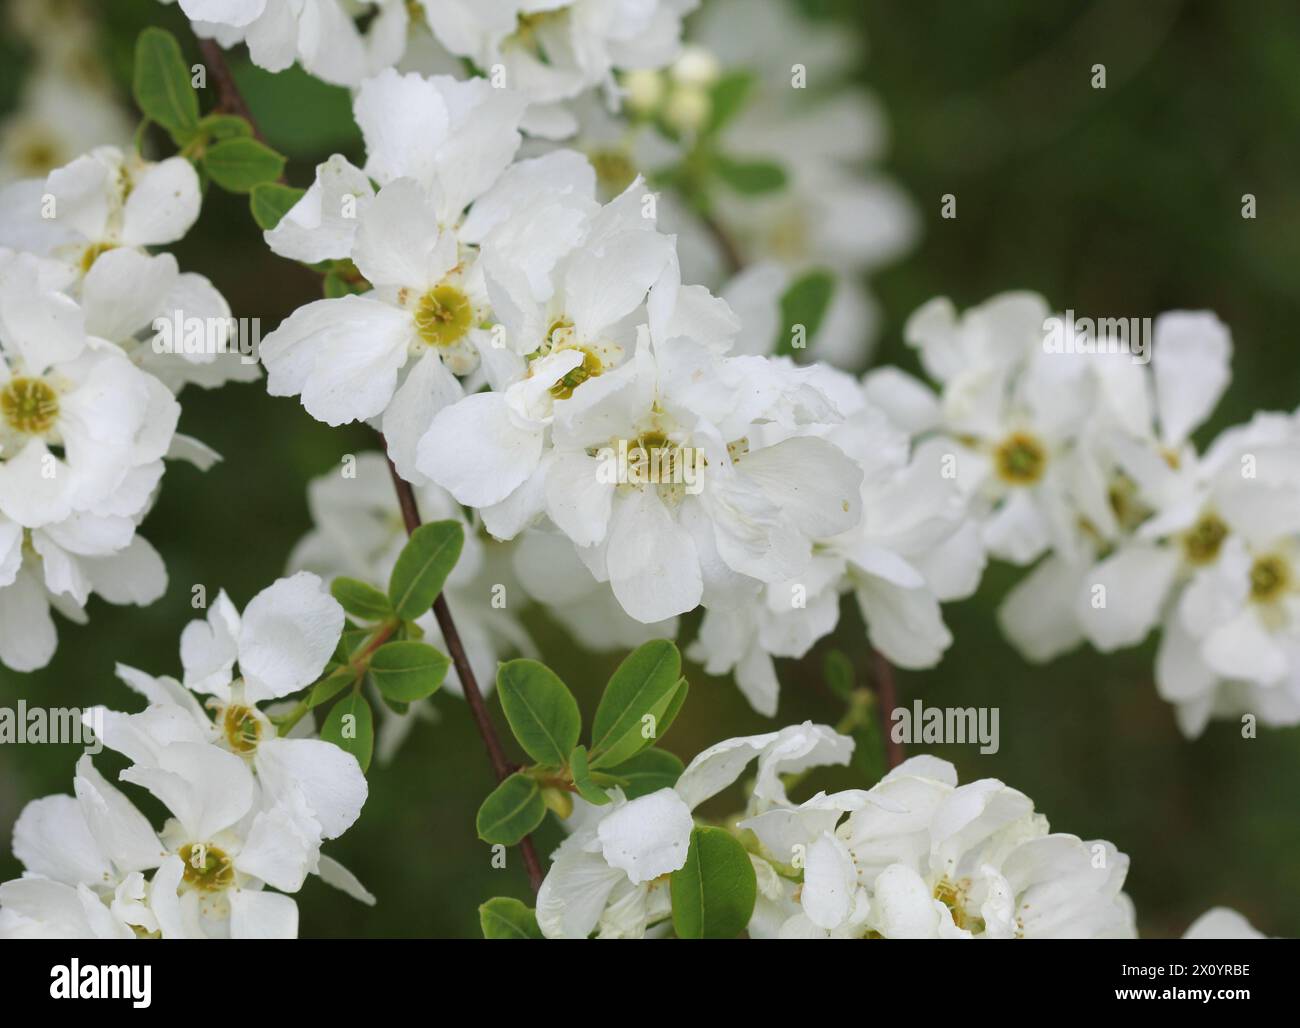 A close up of the white flowers of Exochorda × macrantha The Bride Stock Photo